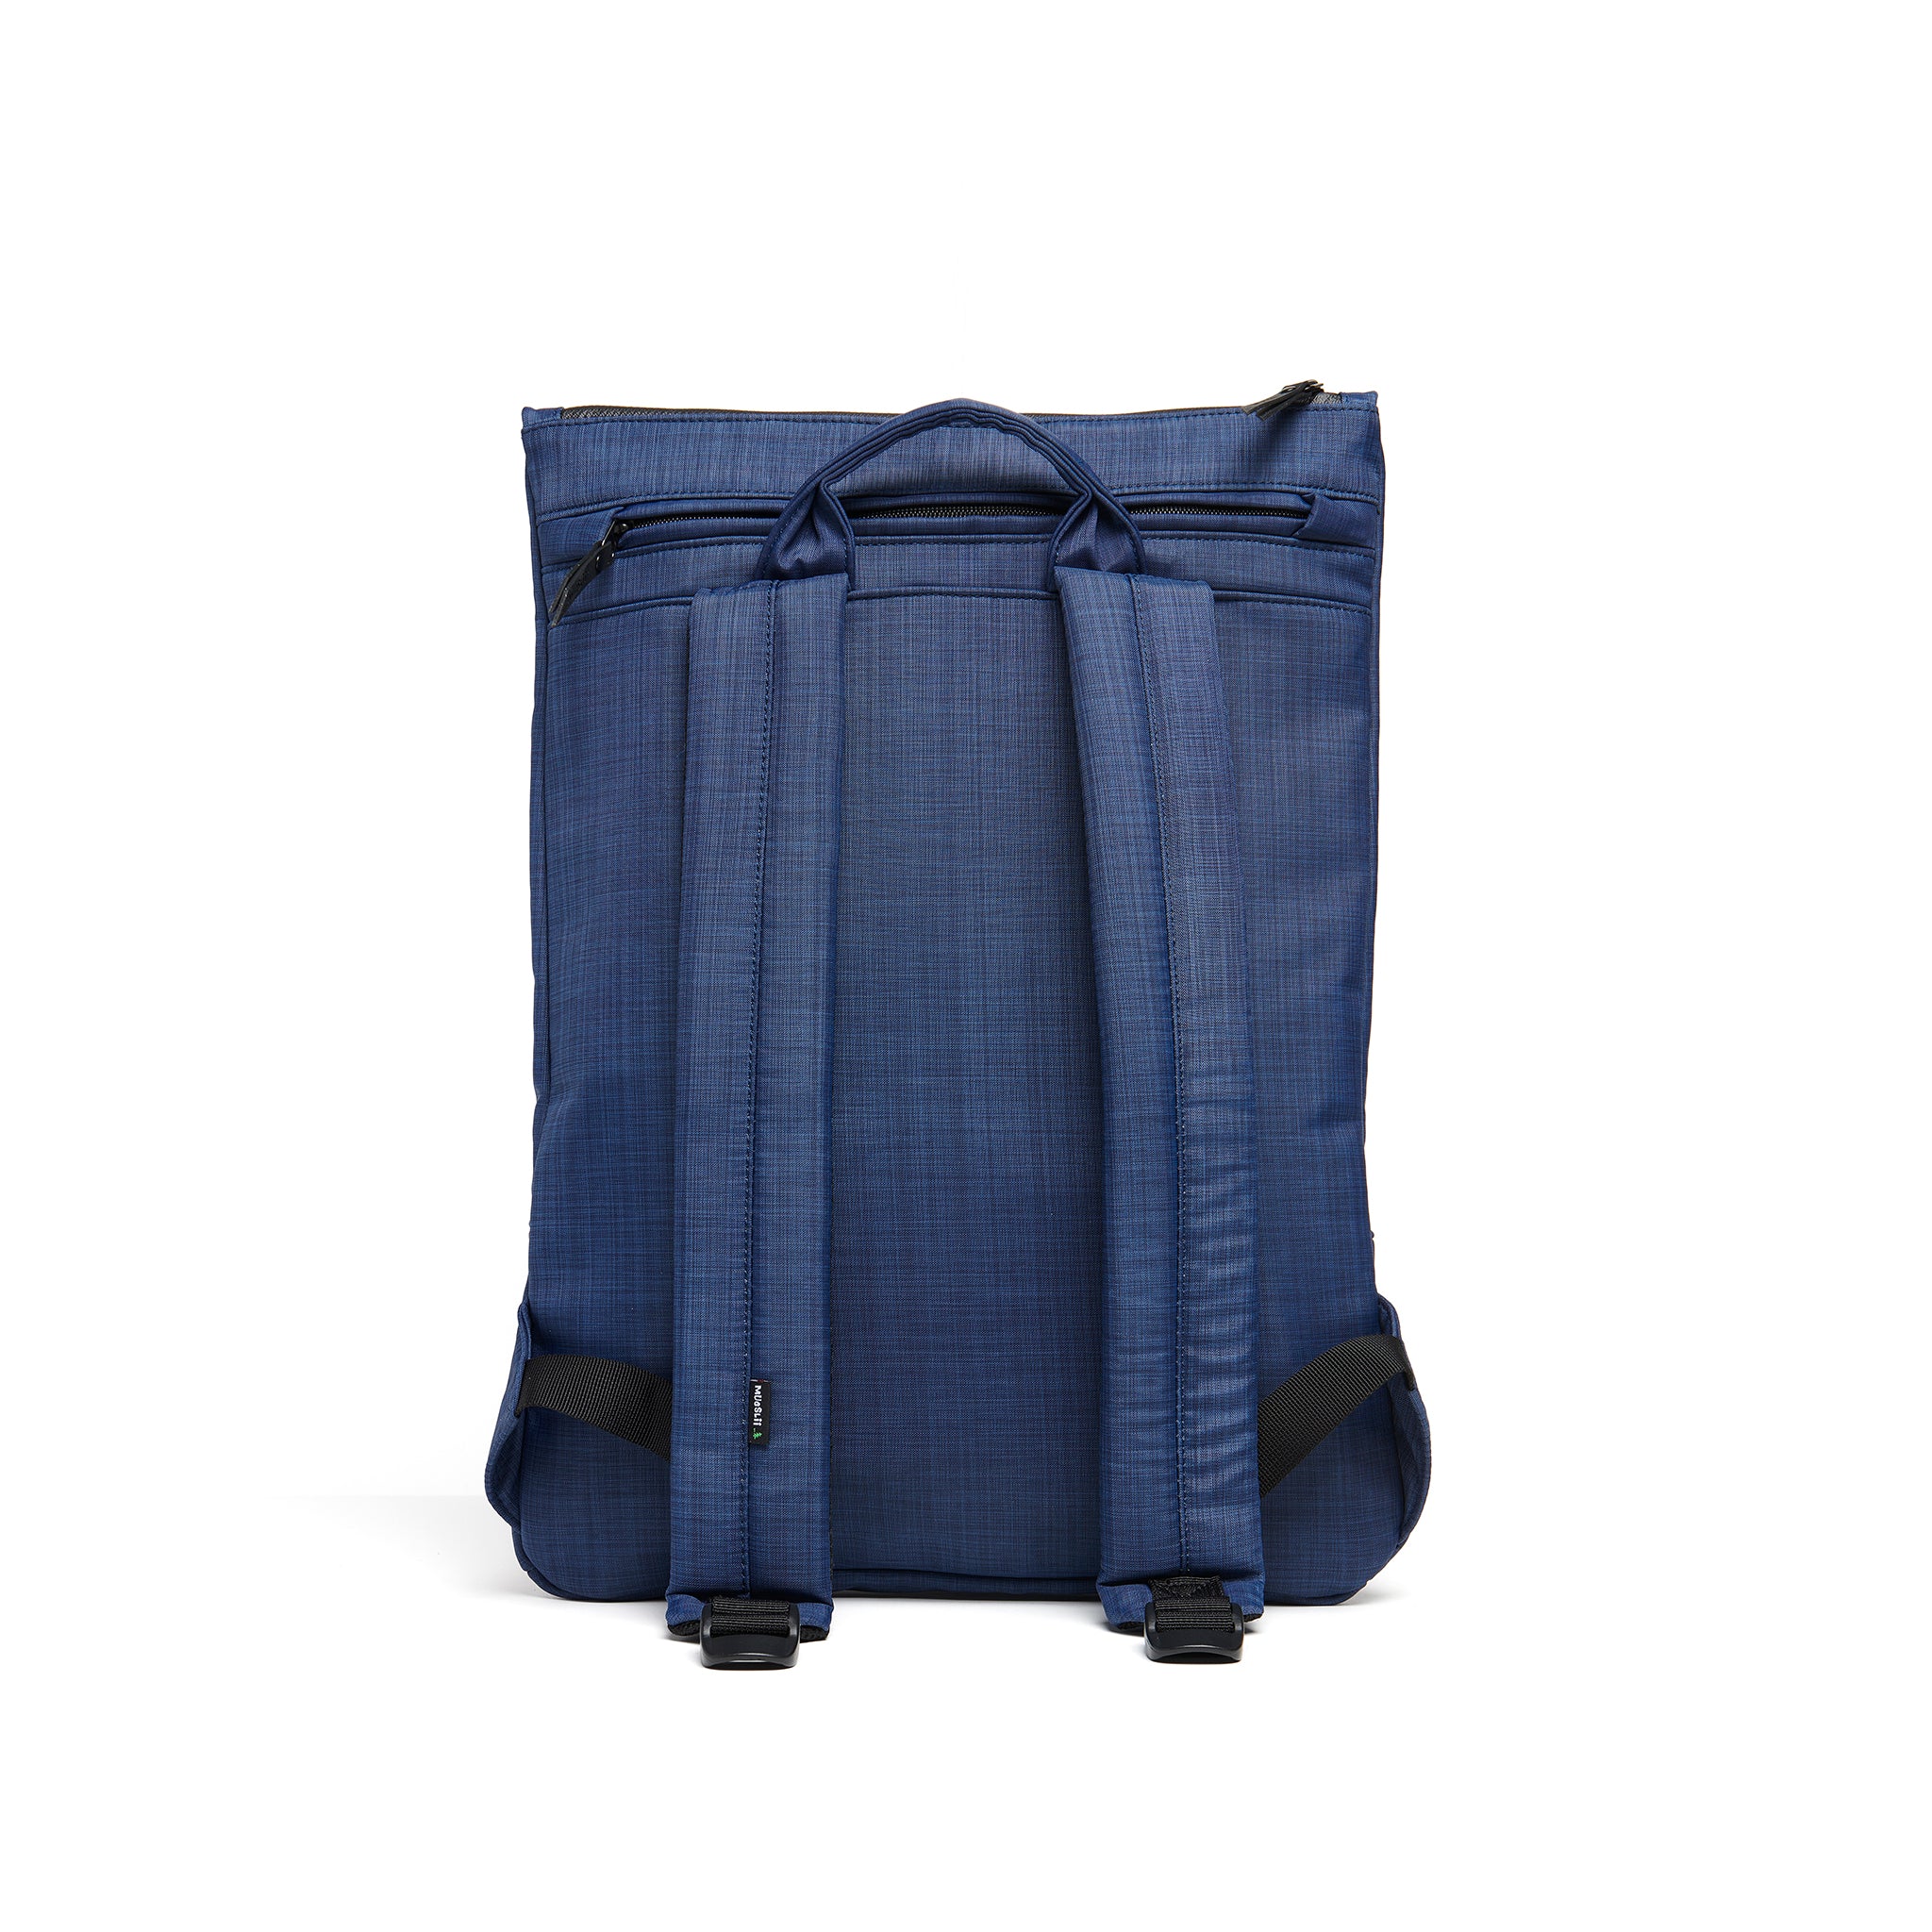 Mueslii light backpack, made of water resistant canvas nylon, with a laptop compartment, color ocean blue, back view.